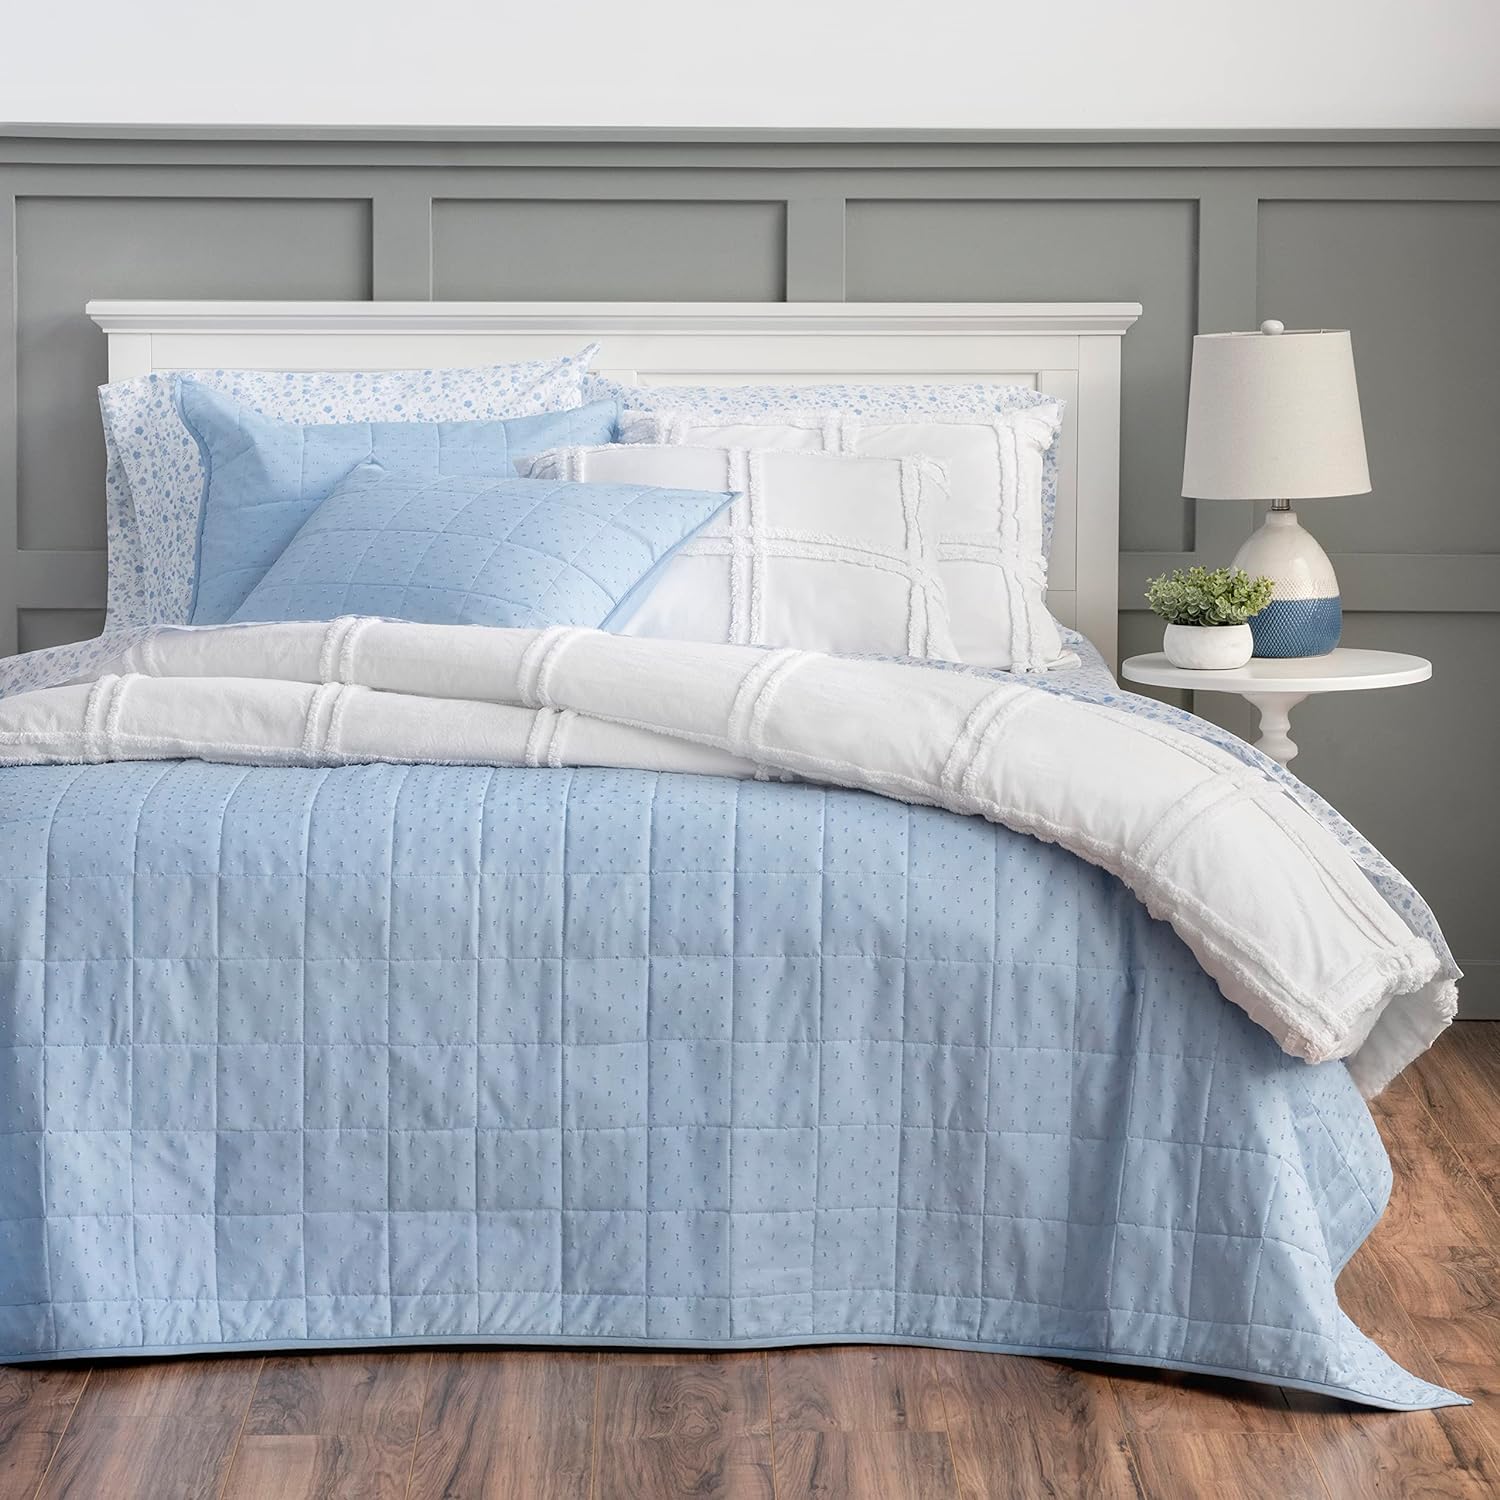 Martha Stewart 3-Piece Cotton Quilt & Shams Set (Various Sizes & Colors): From $18.69 + Free Shipping w/ Prime